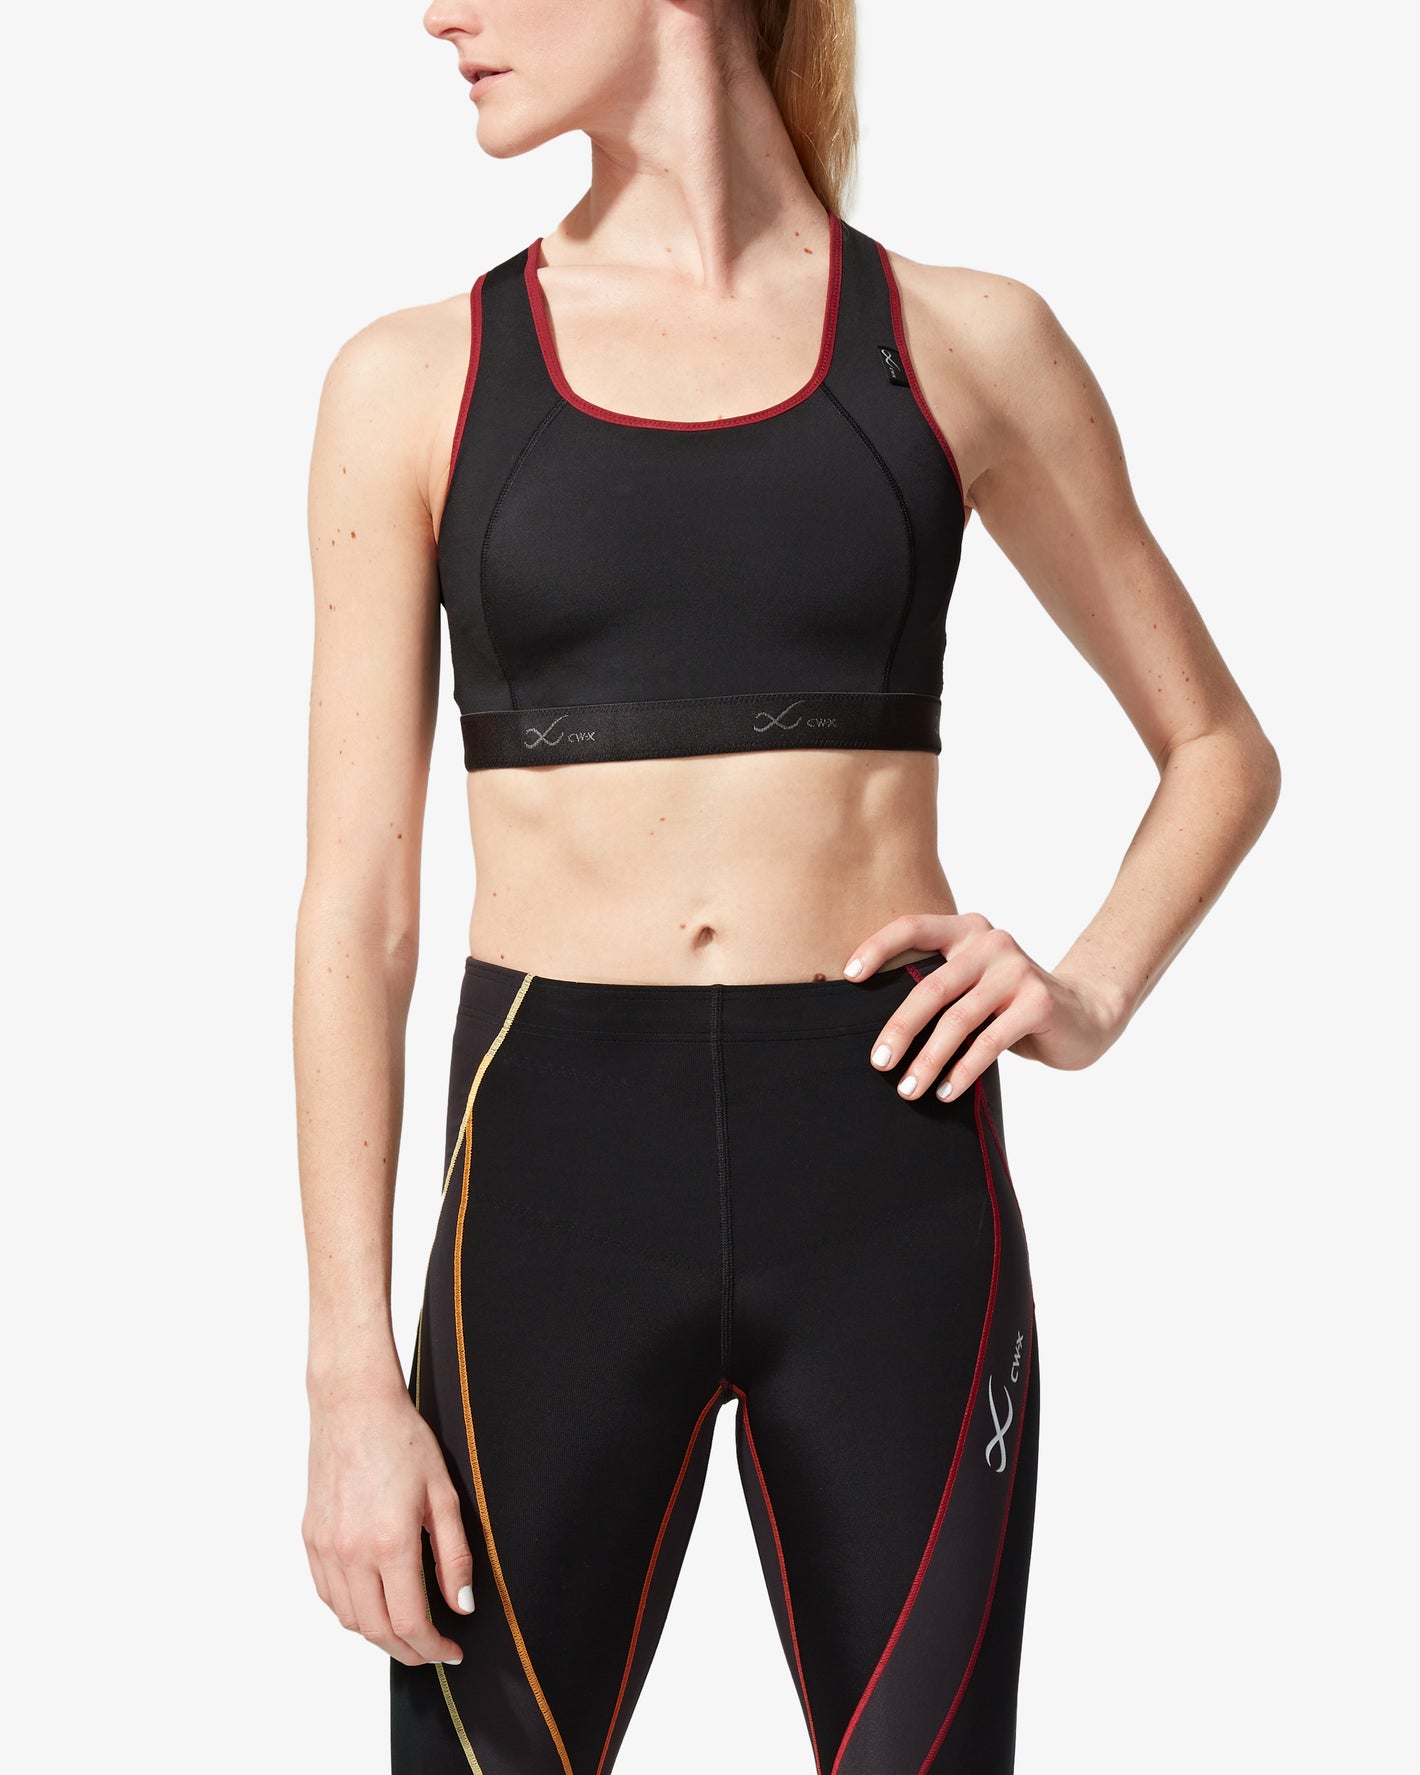 The Top 10 Sweat-Wicking Sports Bras for Maximum Comfort and Support